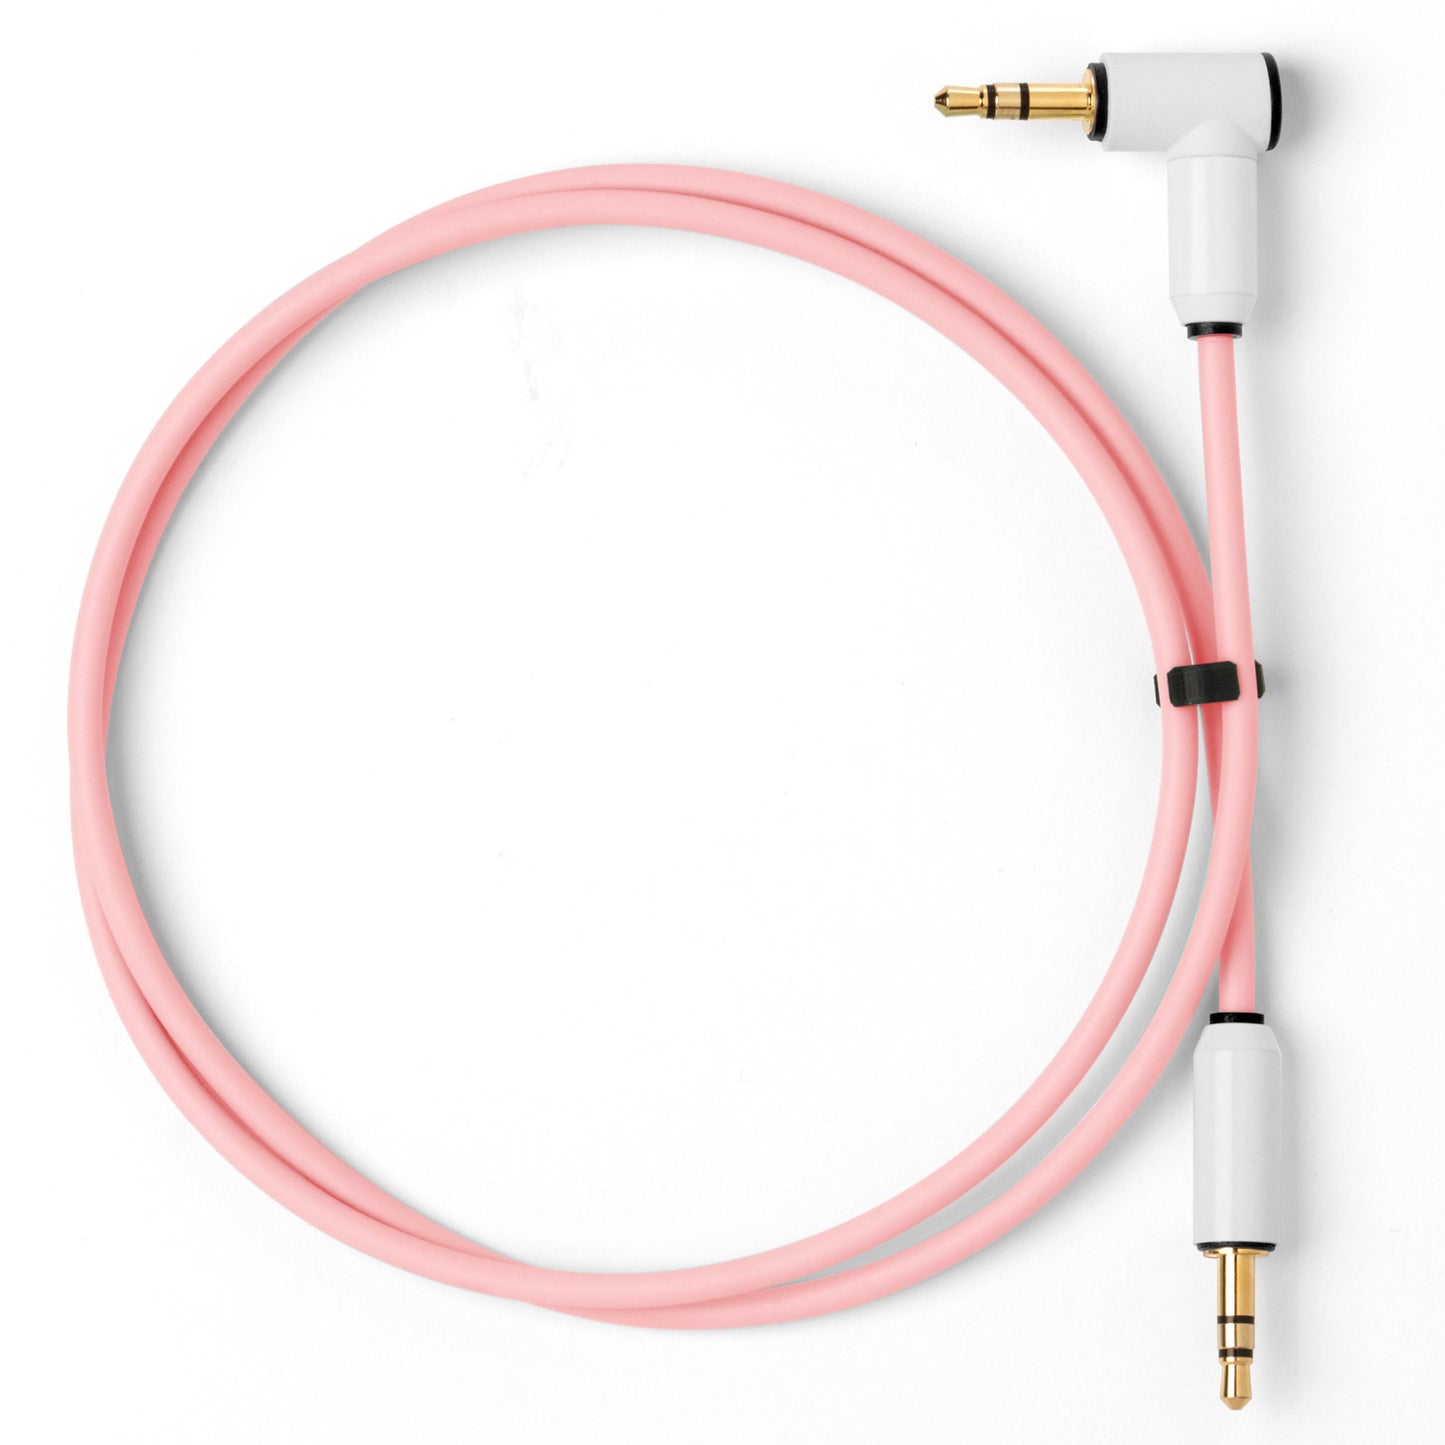 Candycords - myVolts audio cable, straight mini jack to angled mini jack, 70cm